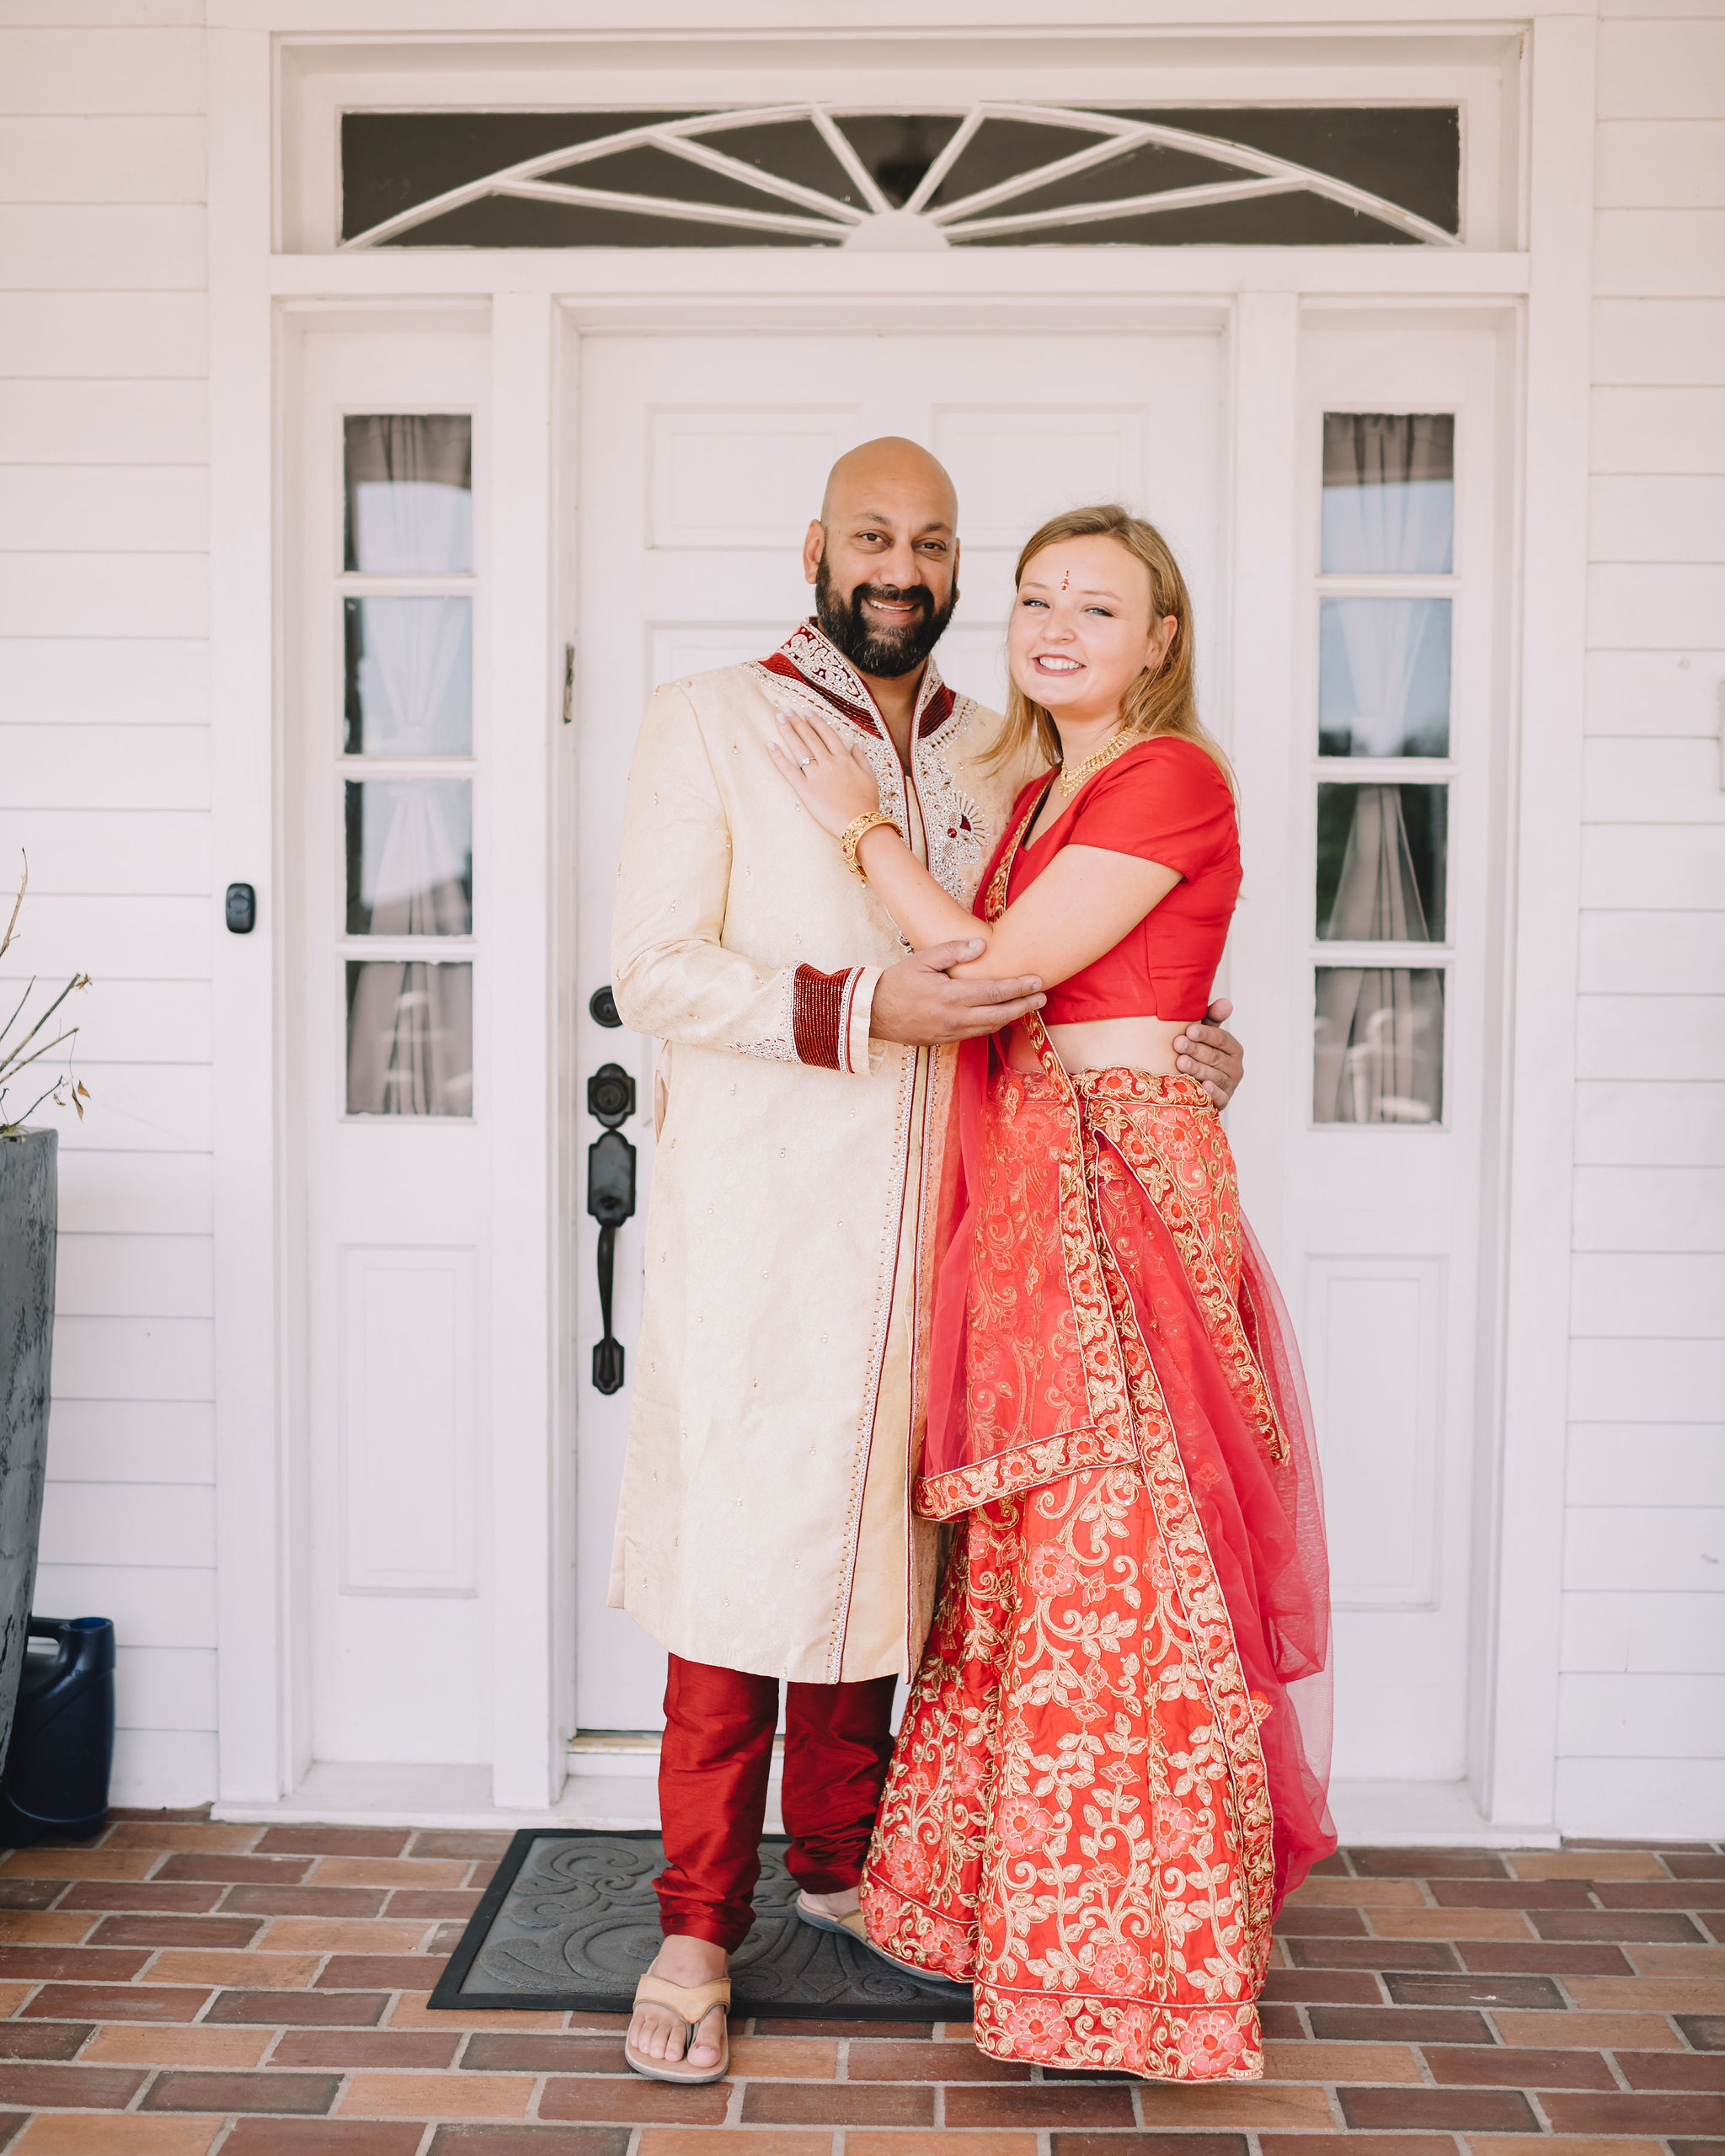 Rachel and Jimmy's wedding weekend included a Mehndi Party. For this event, Rachel wore a traditional Lehenga in red and gold and Jimmy wore a Sherwani with red embroidered detail.